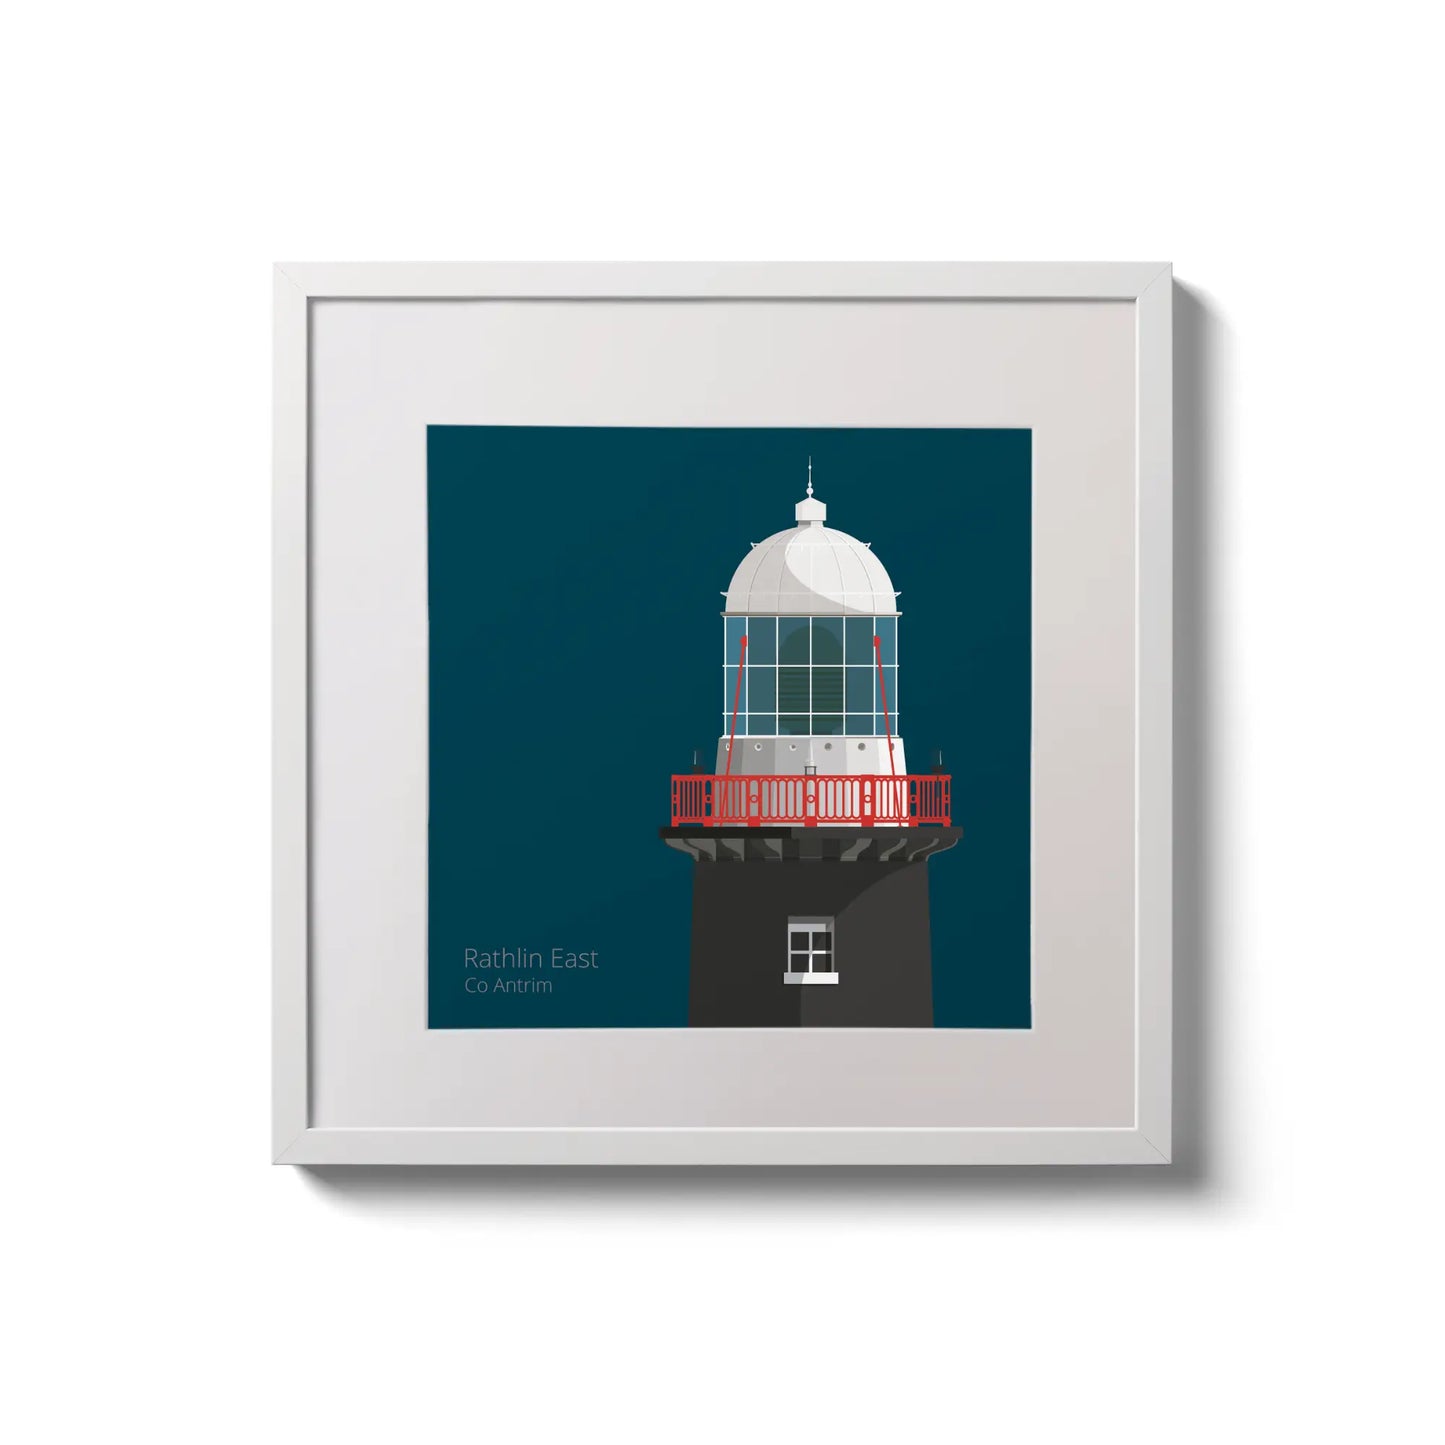 Illustration of Rathlin East lighthouse on a midnight blue background,  in a white square frame measuring 20x20cm.